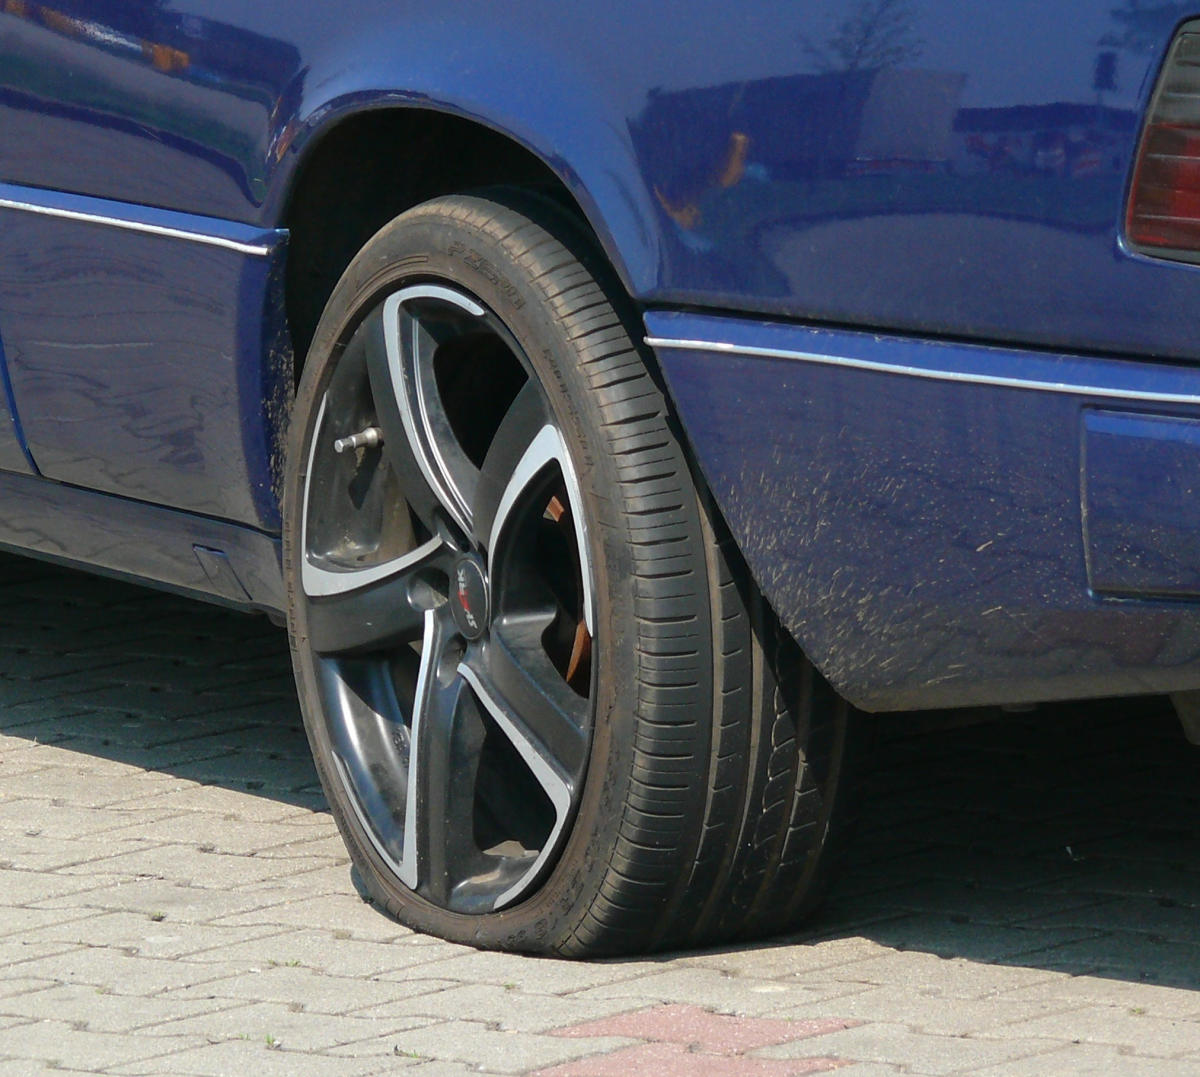 Uneven tire pressure can cause performance issues.